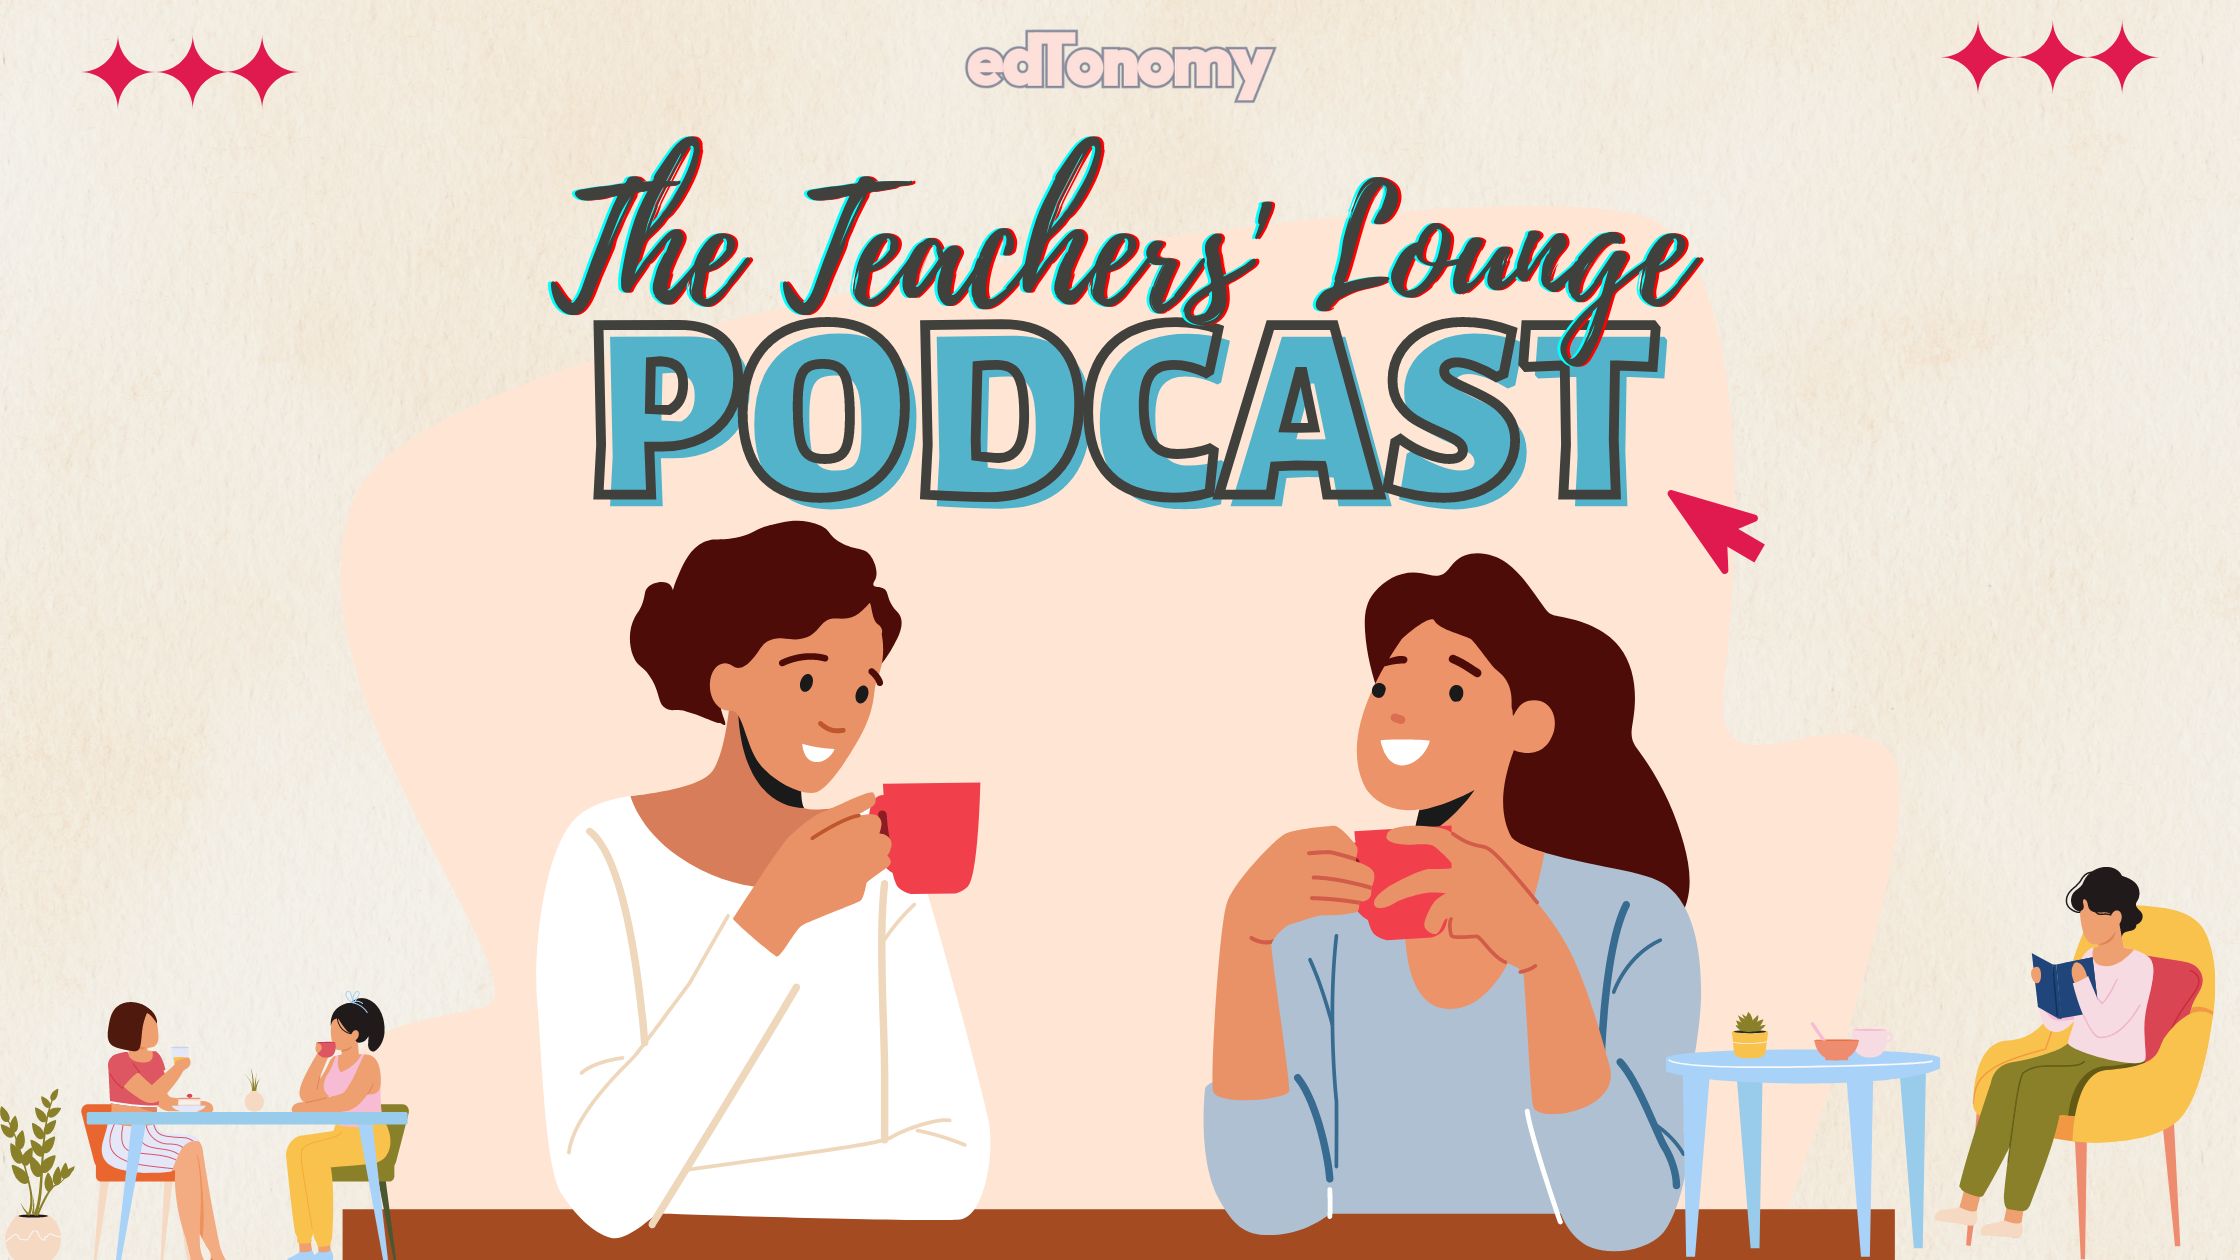 The Teachers' Lounge: edTonomy's reinvented podcast, coming soon!